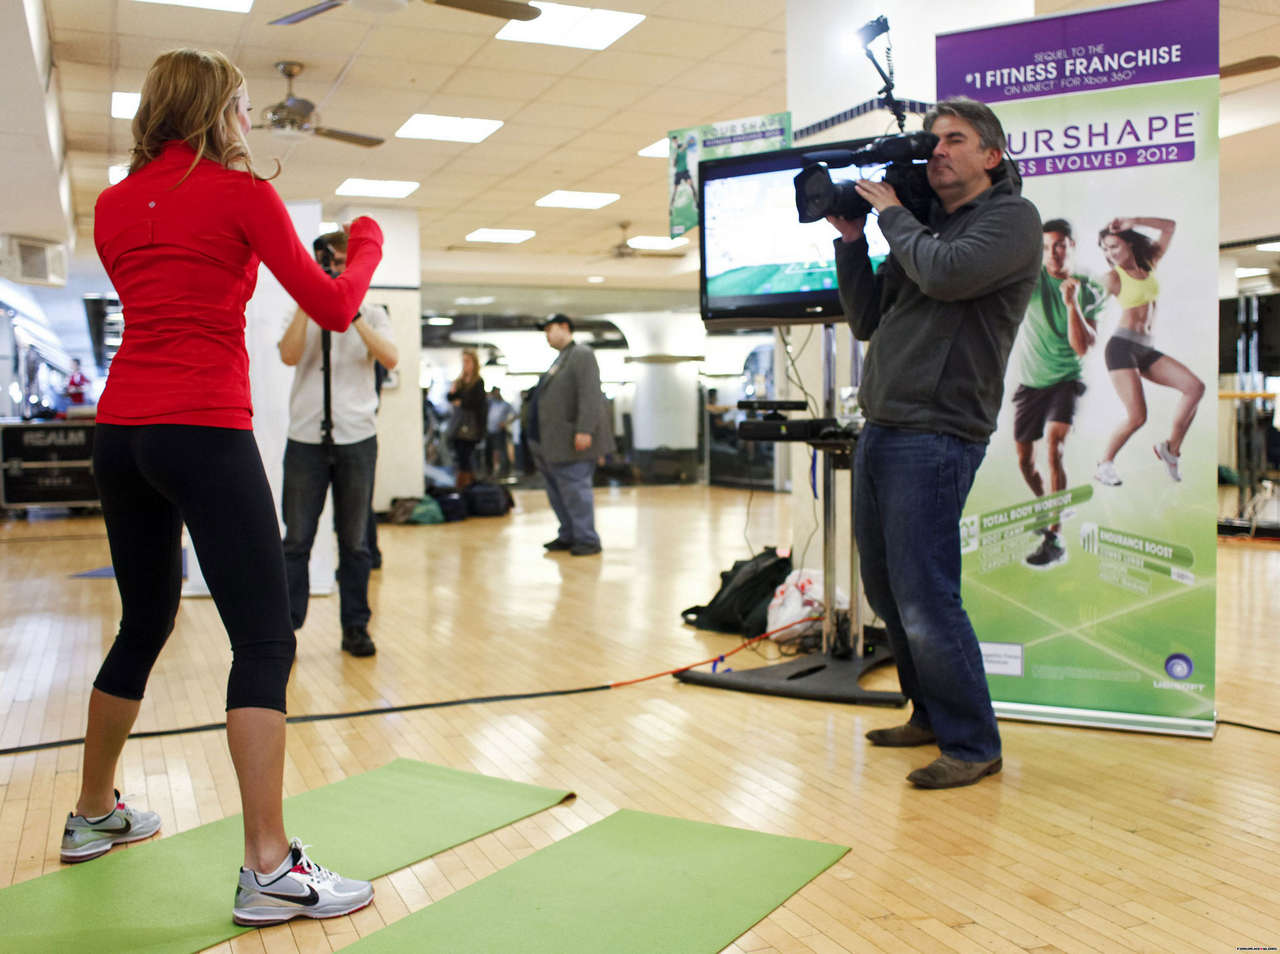 Stacy Keibler Launch Your Shape Fitness Evolved 2012 Videogame